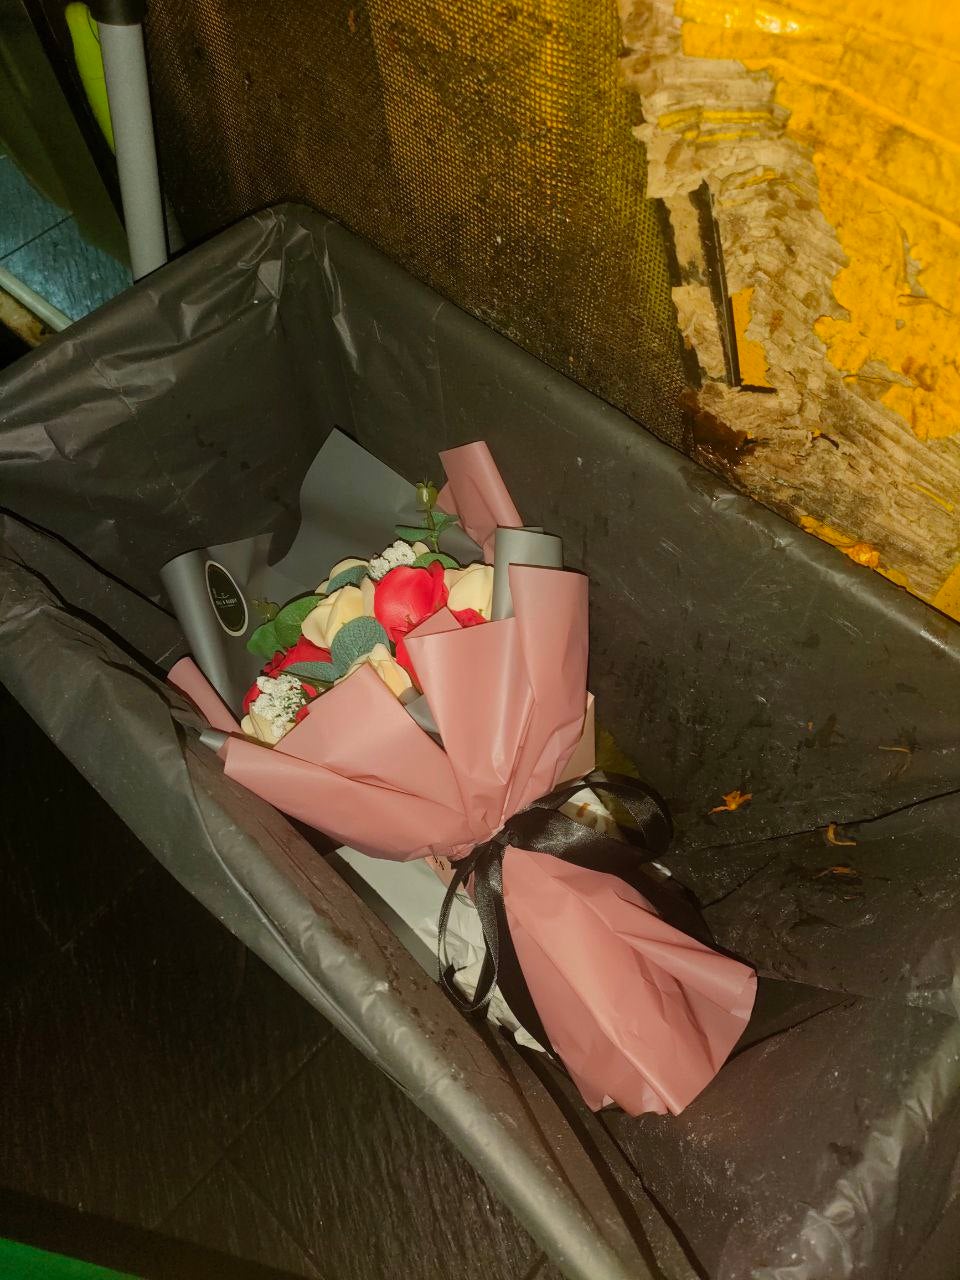 Valentines day roses flower in the beer factory rubbish bin